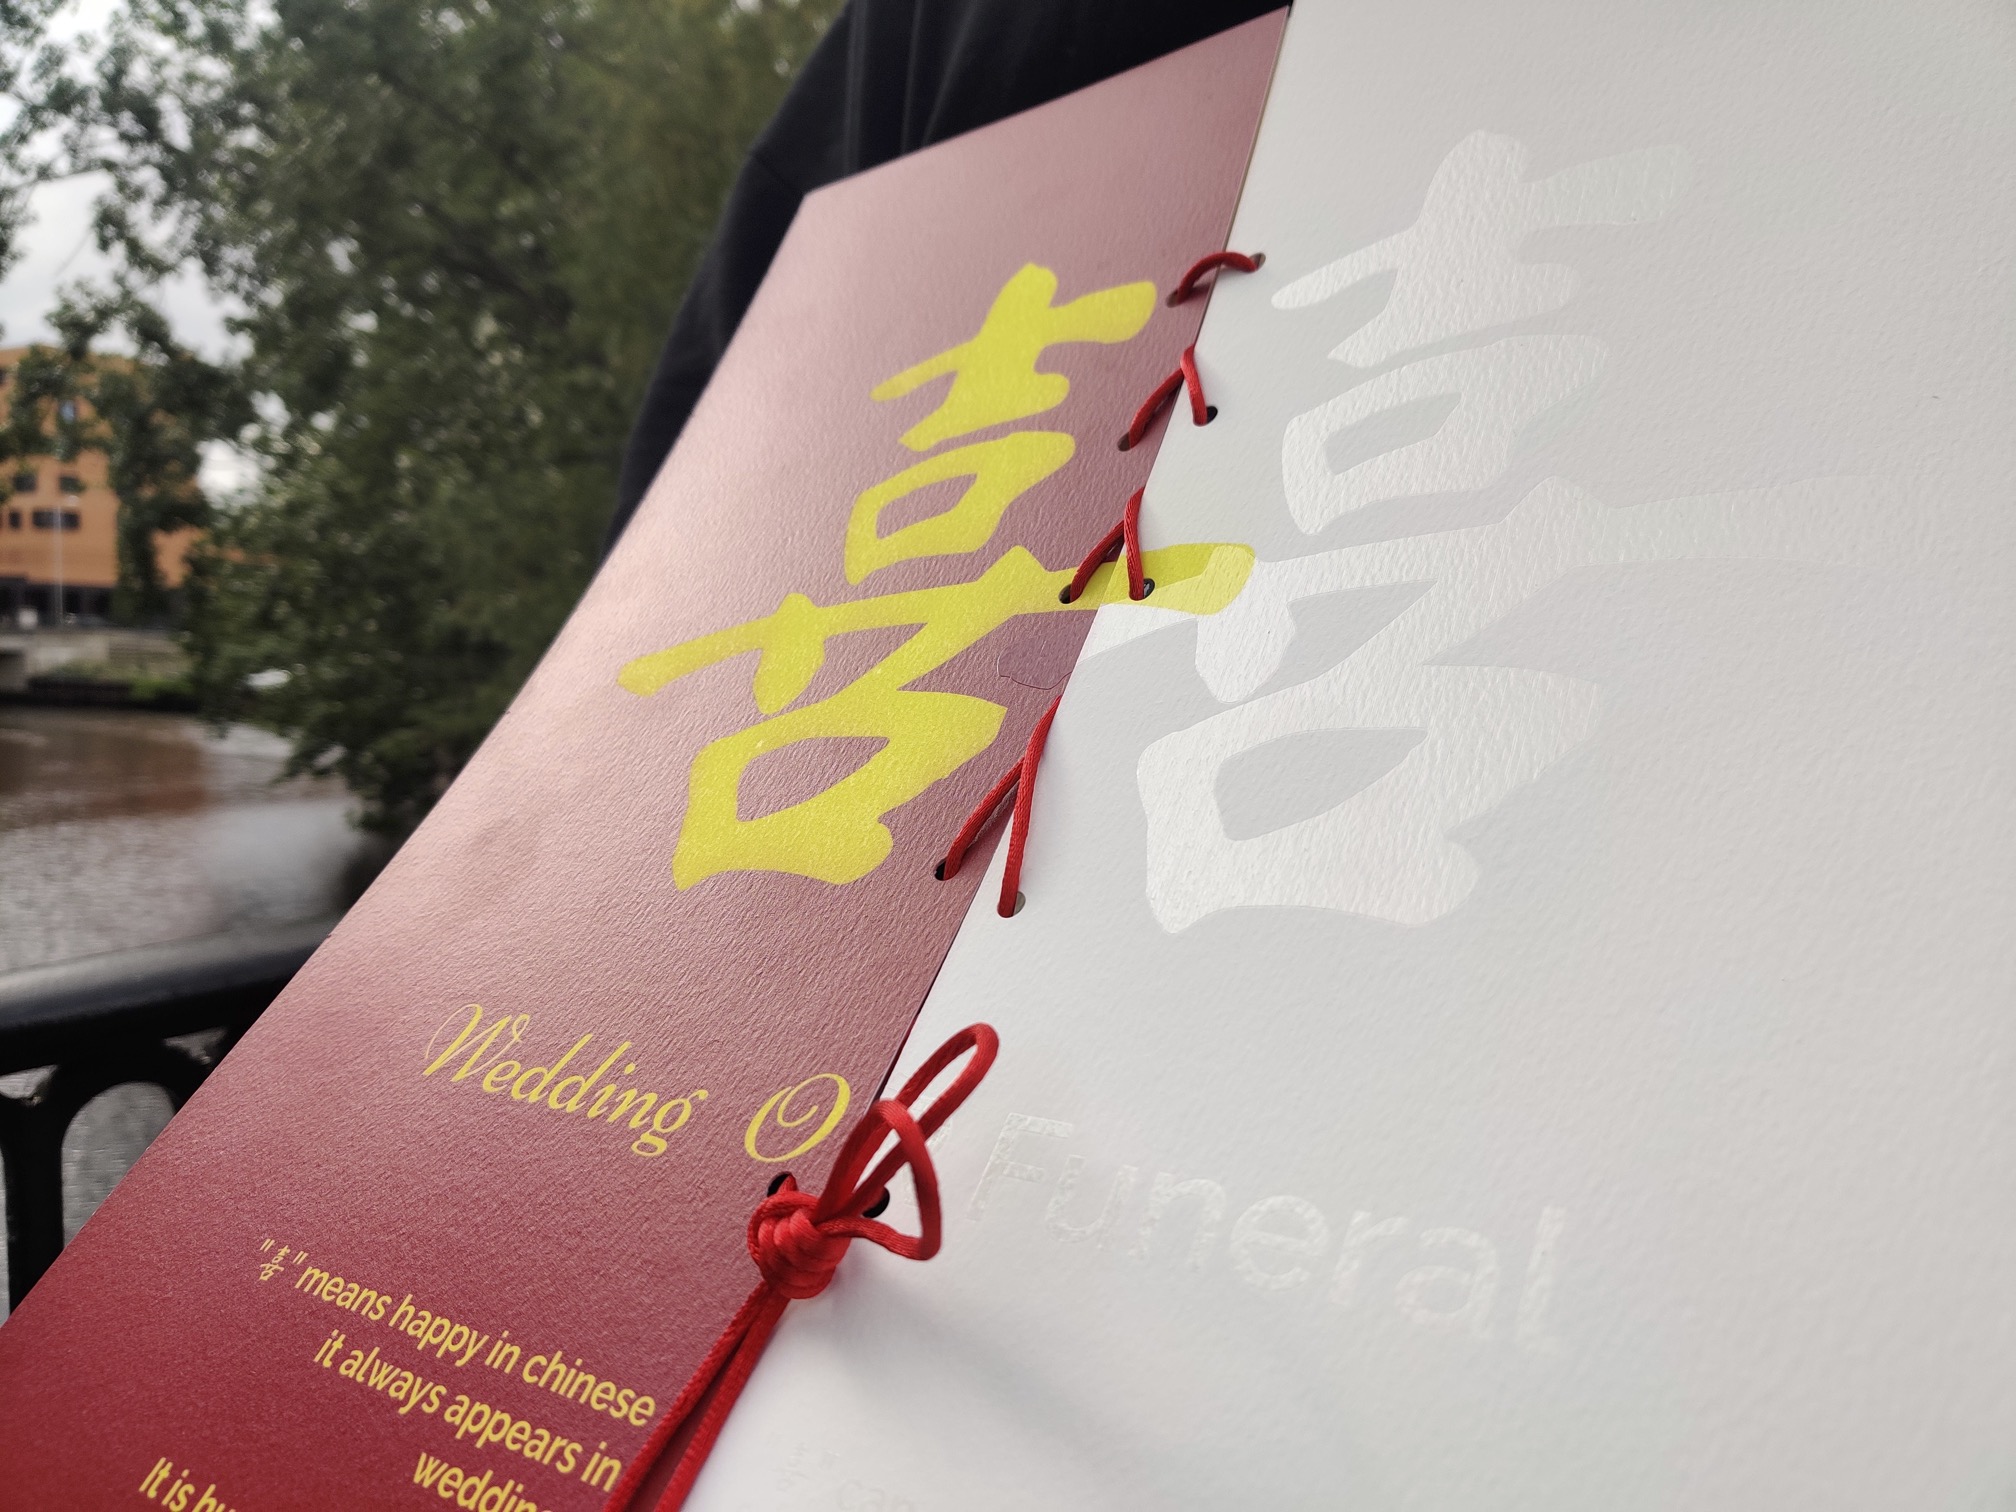 BA Graphic Communication work by Olivia Jia showing a ghost marriage campaign. A photograph of an invitation of two halves. On the left, it's coloured red with yellow writing announcing a wedding. On the right, the invitation is pure white, with a clear spot UV outlining the text, announcing a funeral